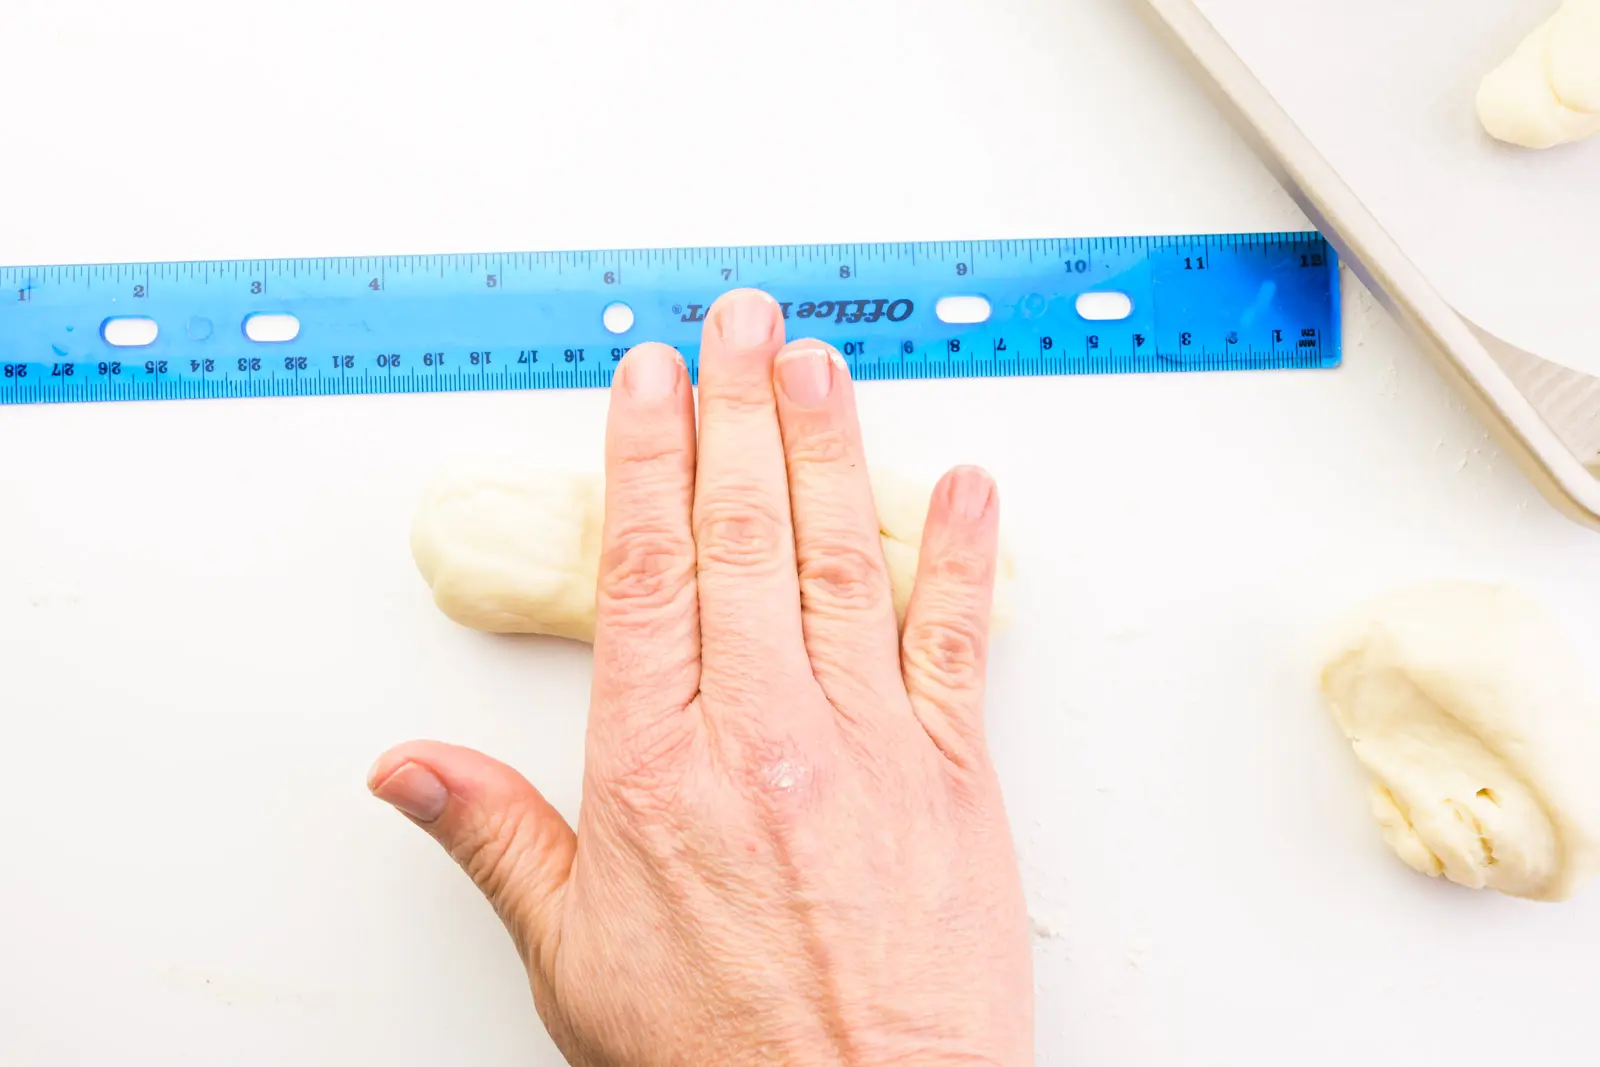 A hand is rolling a piece of dough next to a ruler. There are more dough pieces nearby.